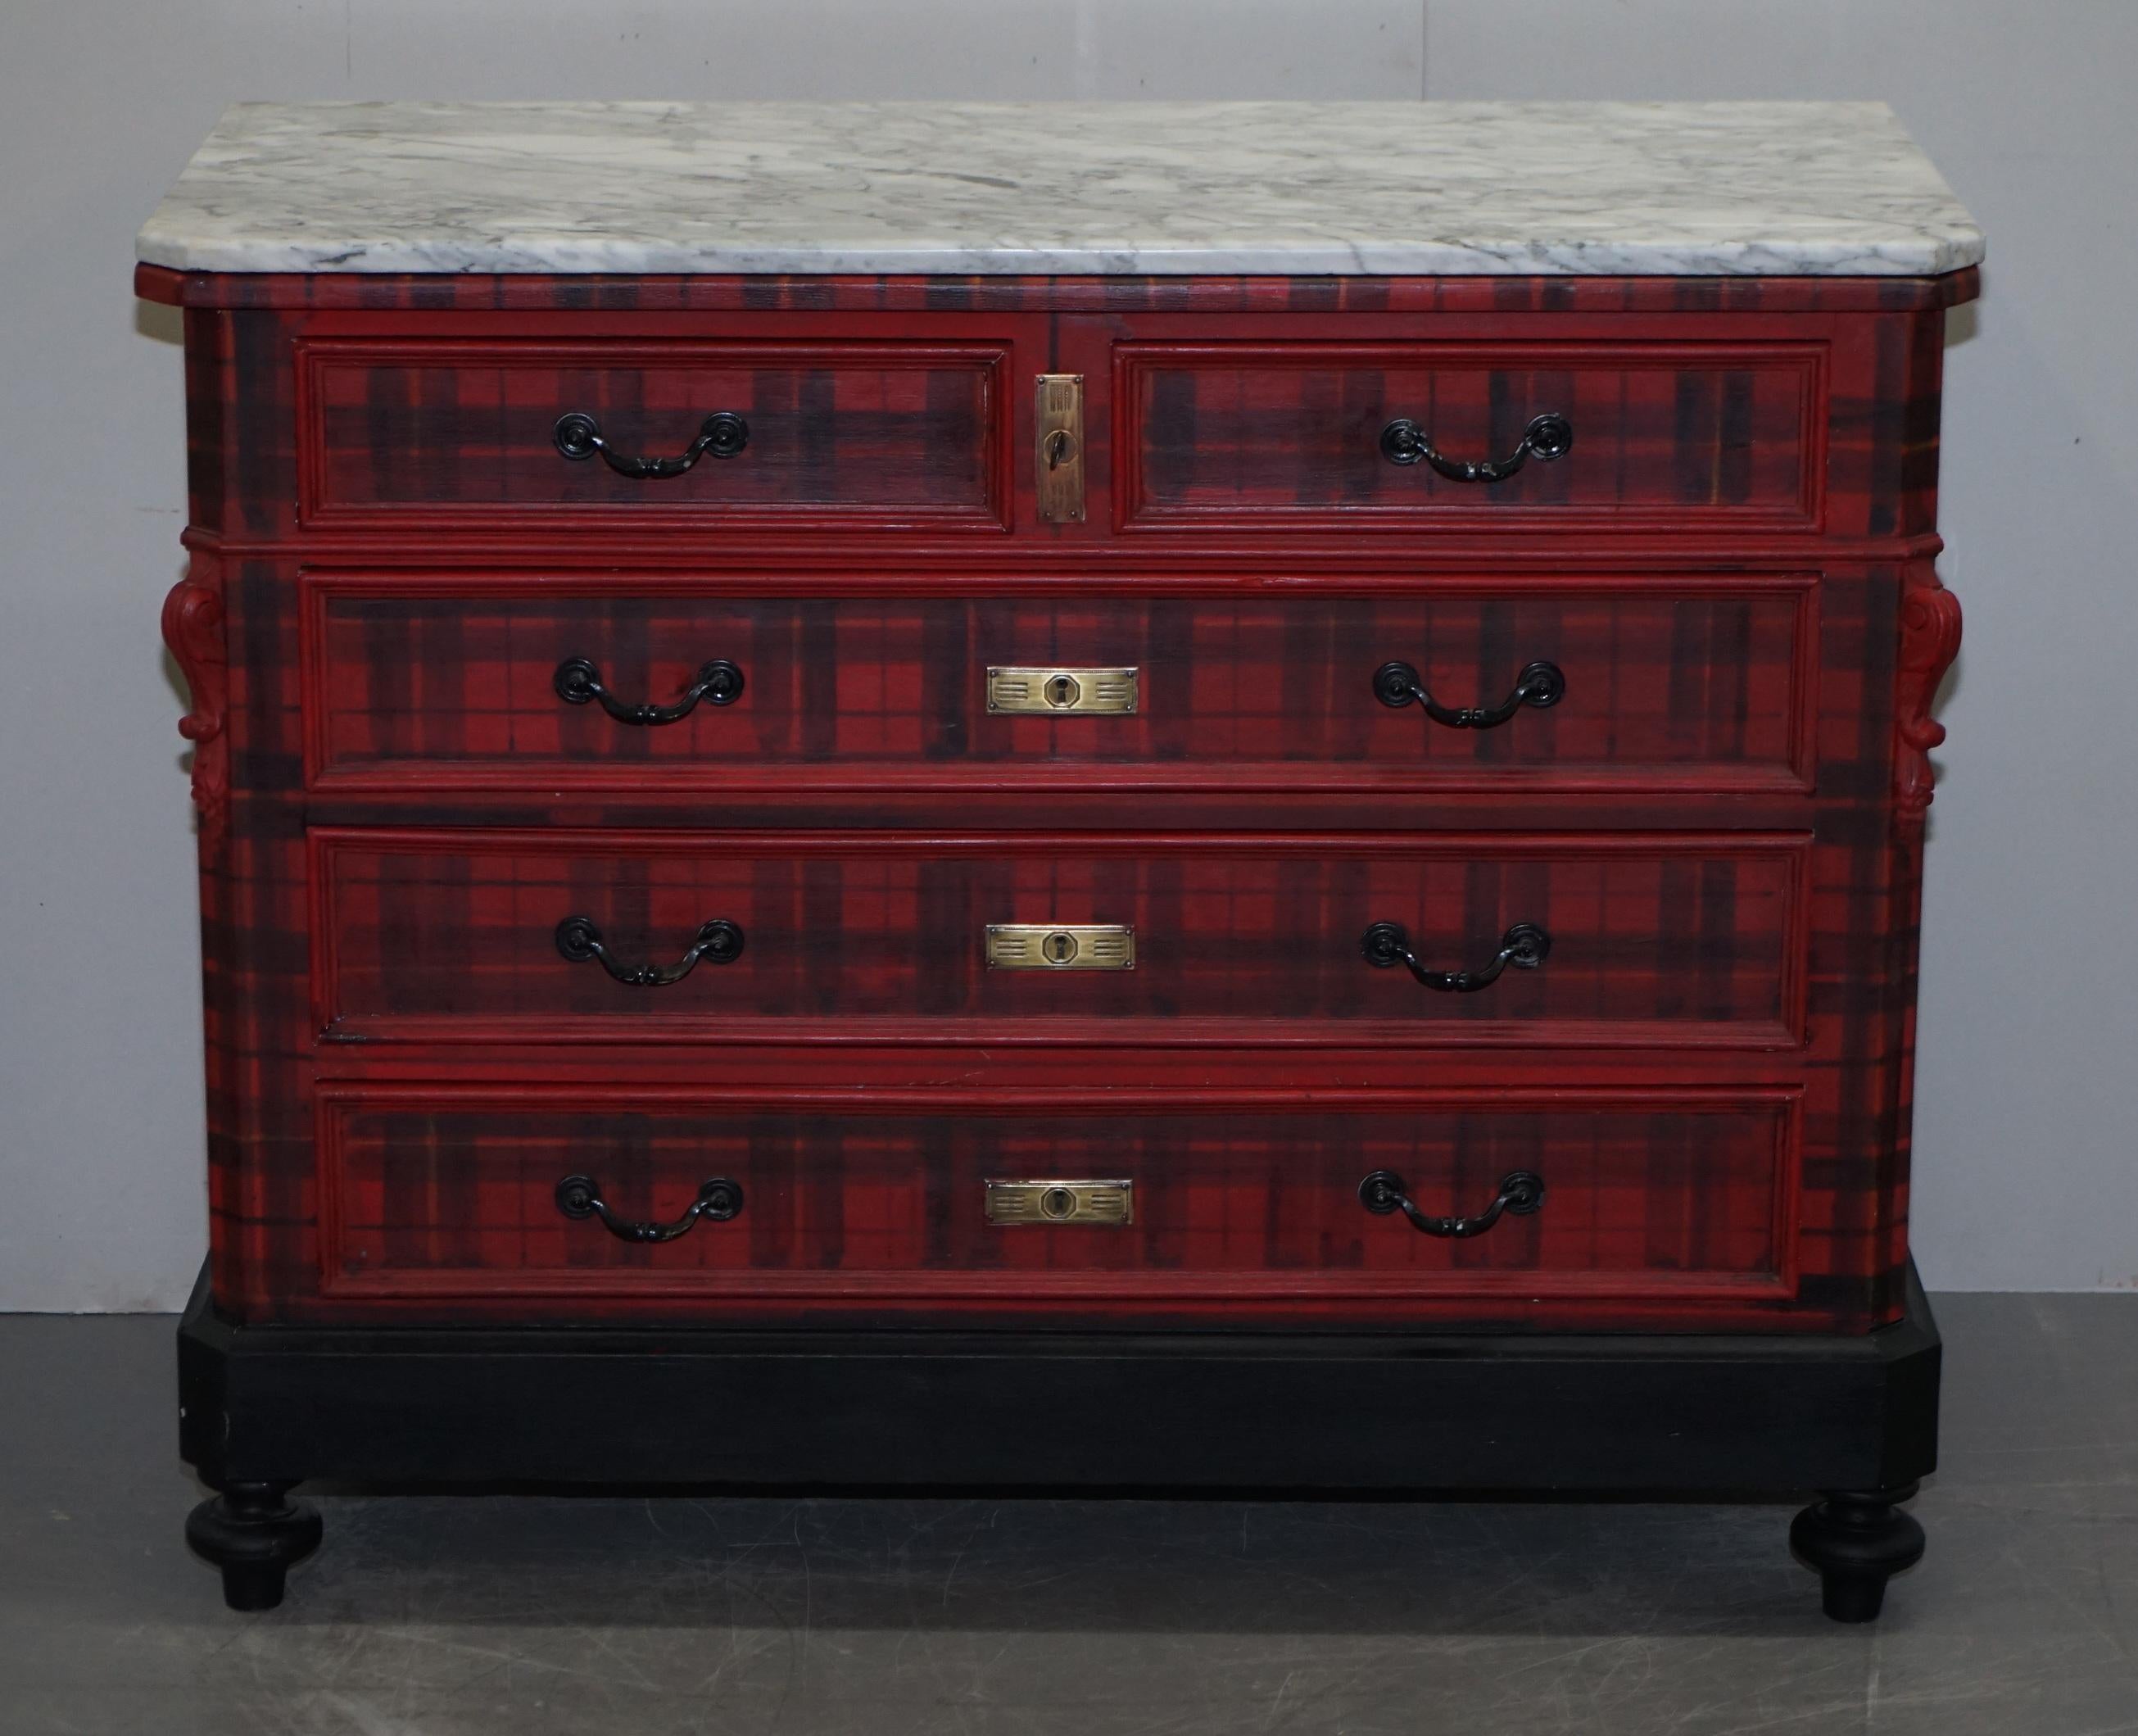 We are delighted to offer for sale this lovely Victorian circa 1880 oak chest of drawers with Scottish Tartan wrap finish and Italian Carrara marble top

A very good looking and decorative chest of drawers, they have naturally been refinished to